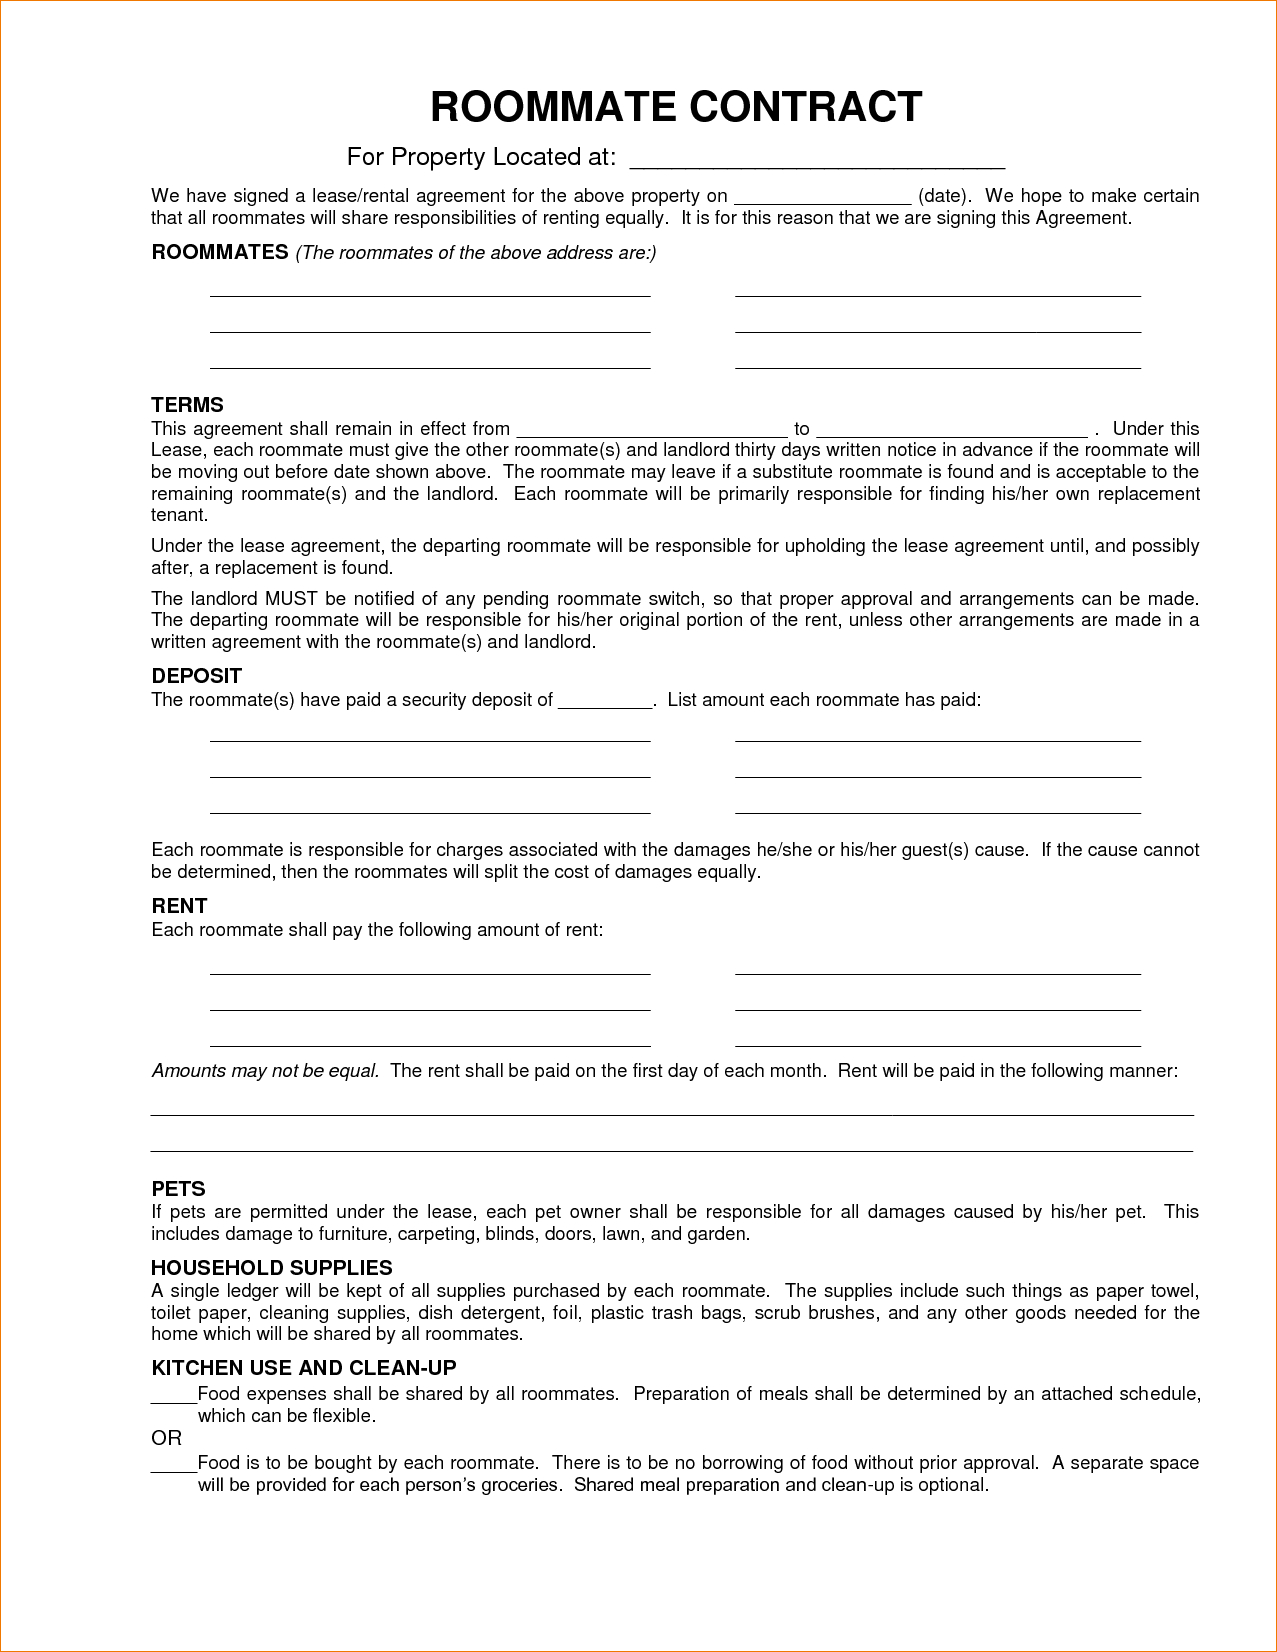 Lease Roommate Agreement Roommate Lease Agreement Contracts Template Selomdigitalsiteco 8